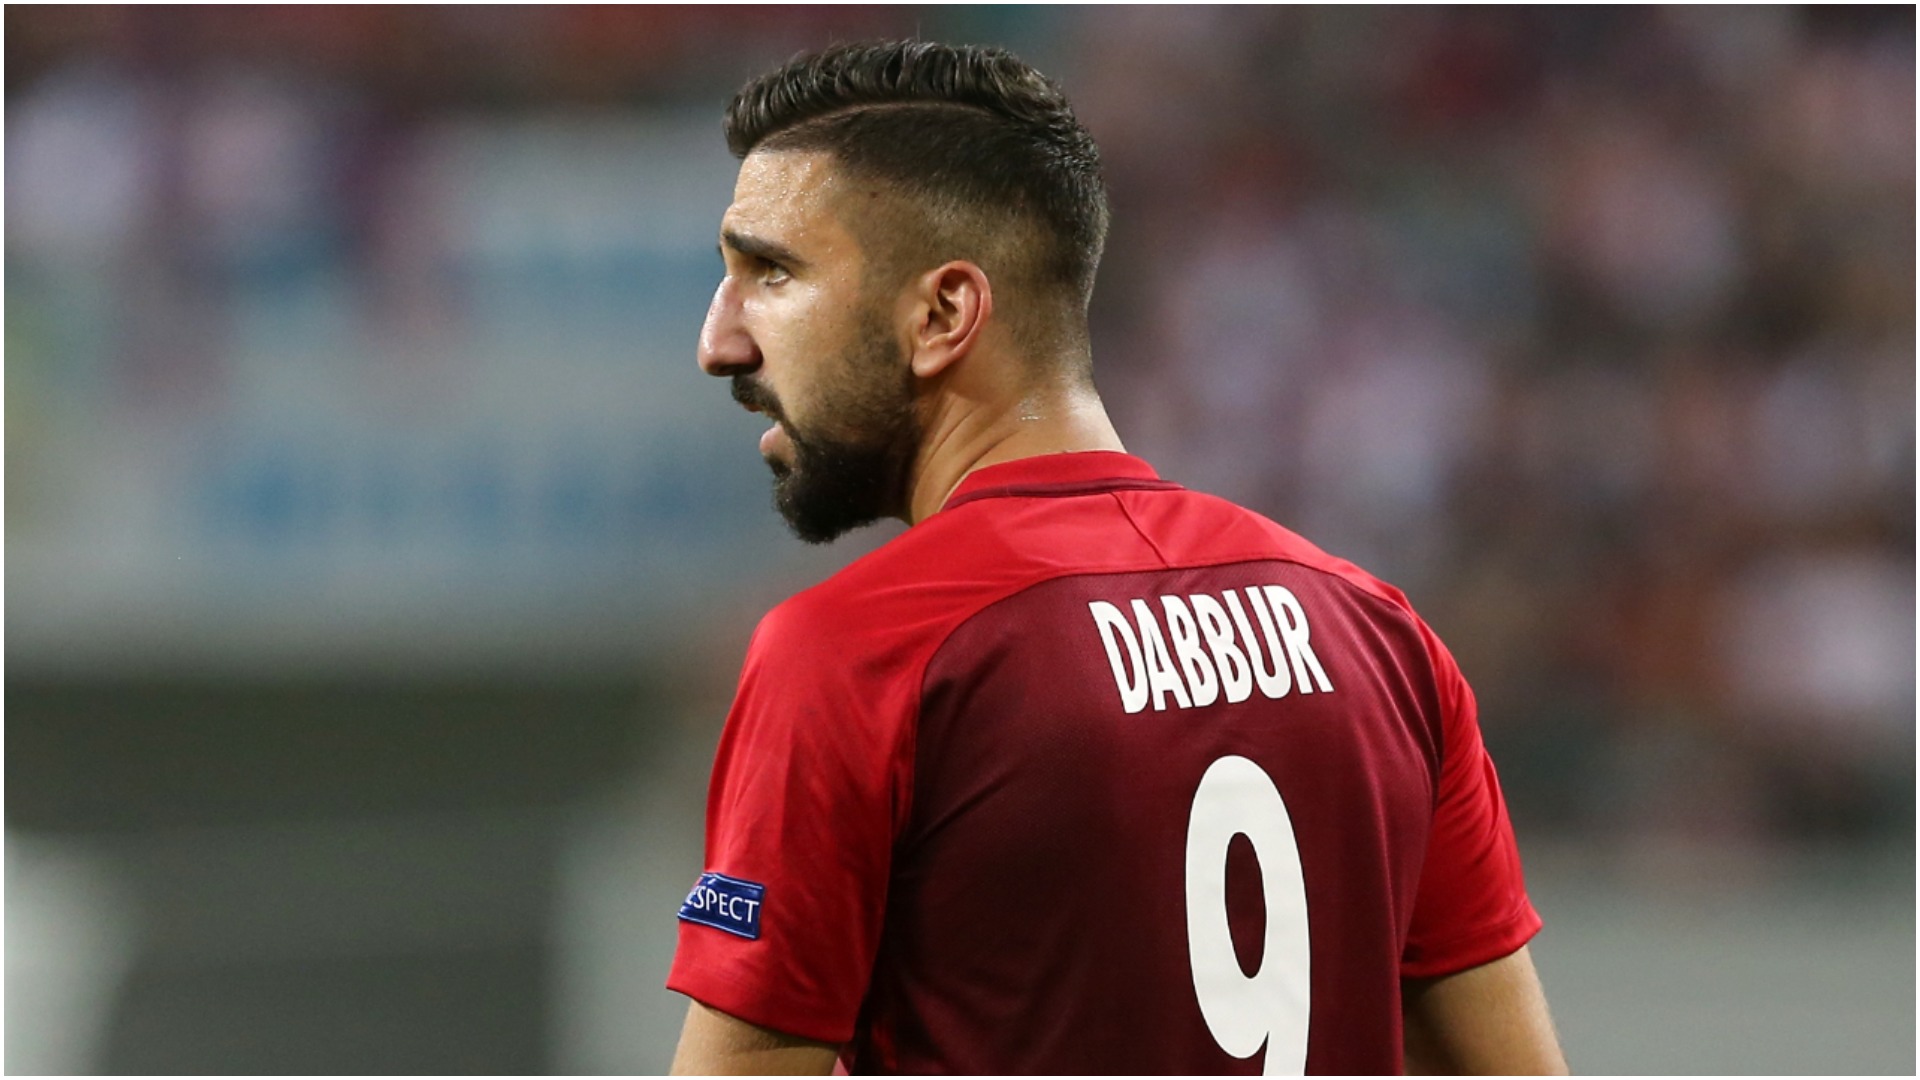 Liverpool had been linked with a move for Salzburg striker Munas Dabbur, but he has travelled to Spain for a medical with Sevilla.